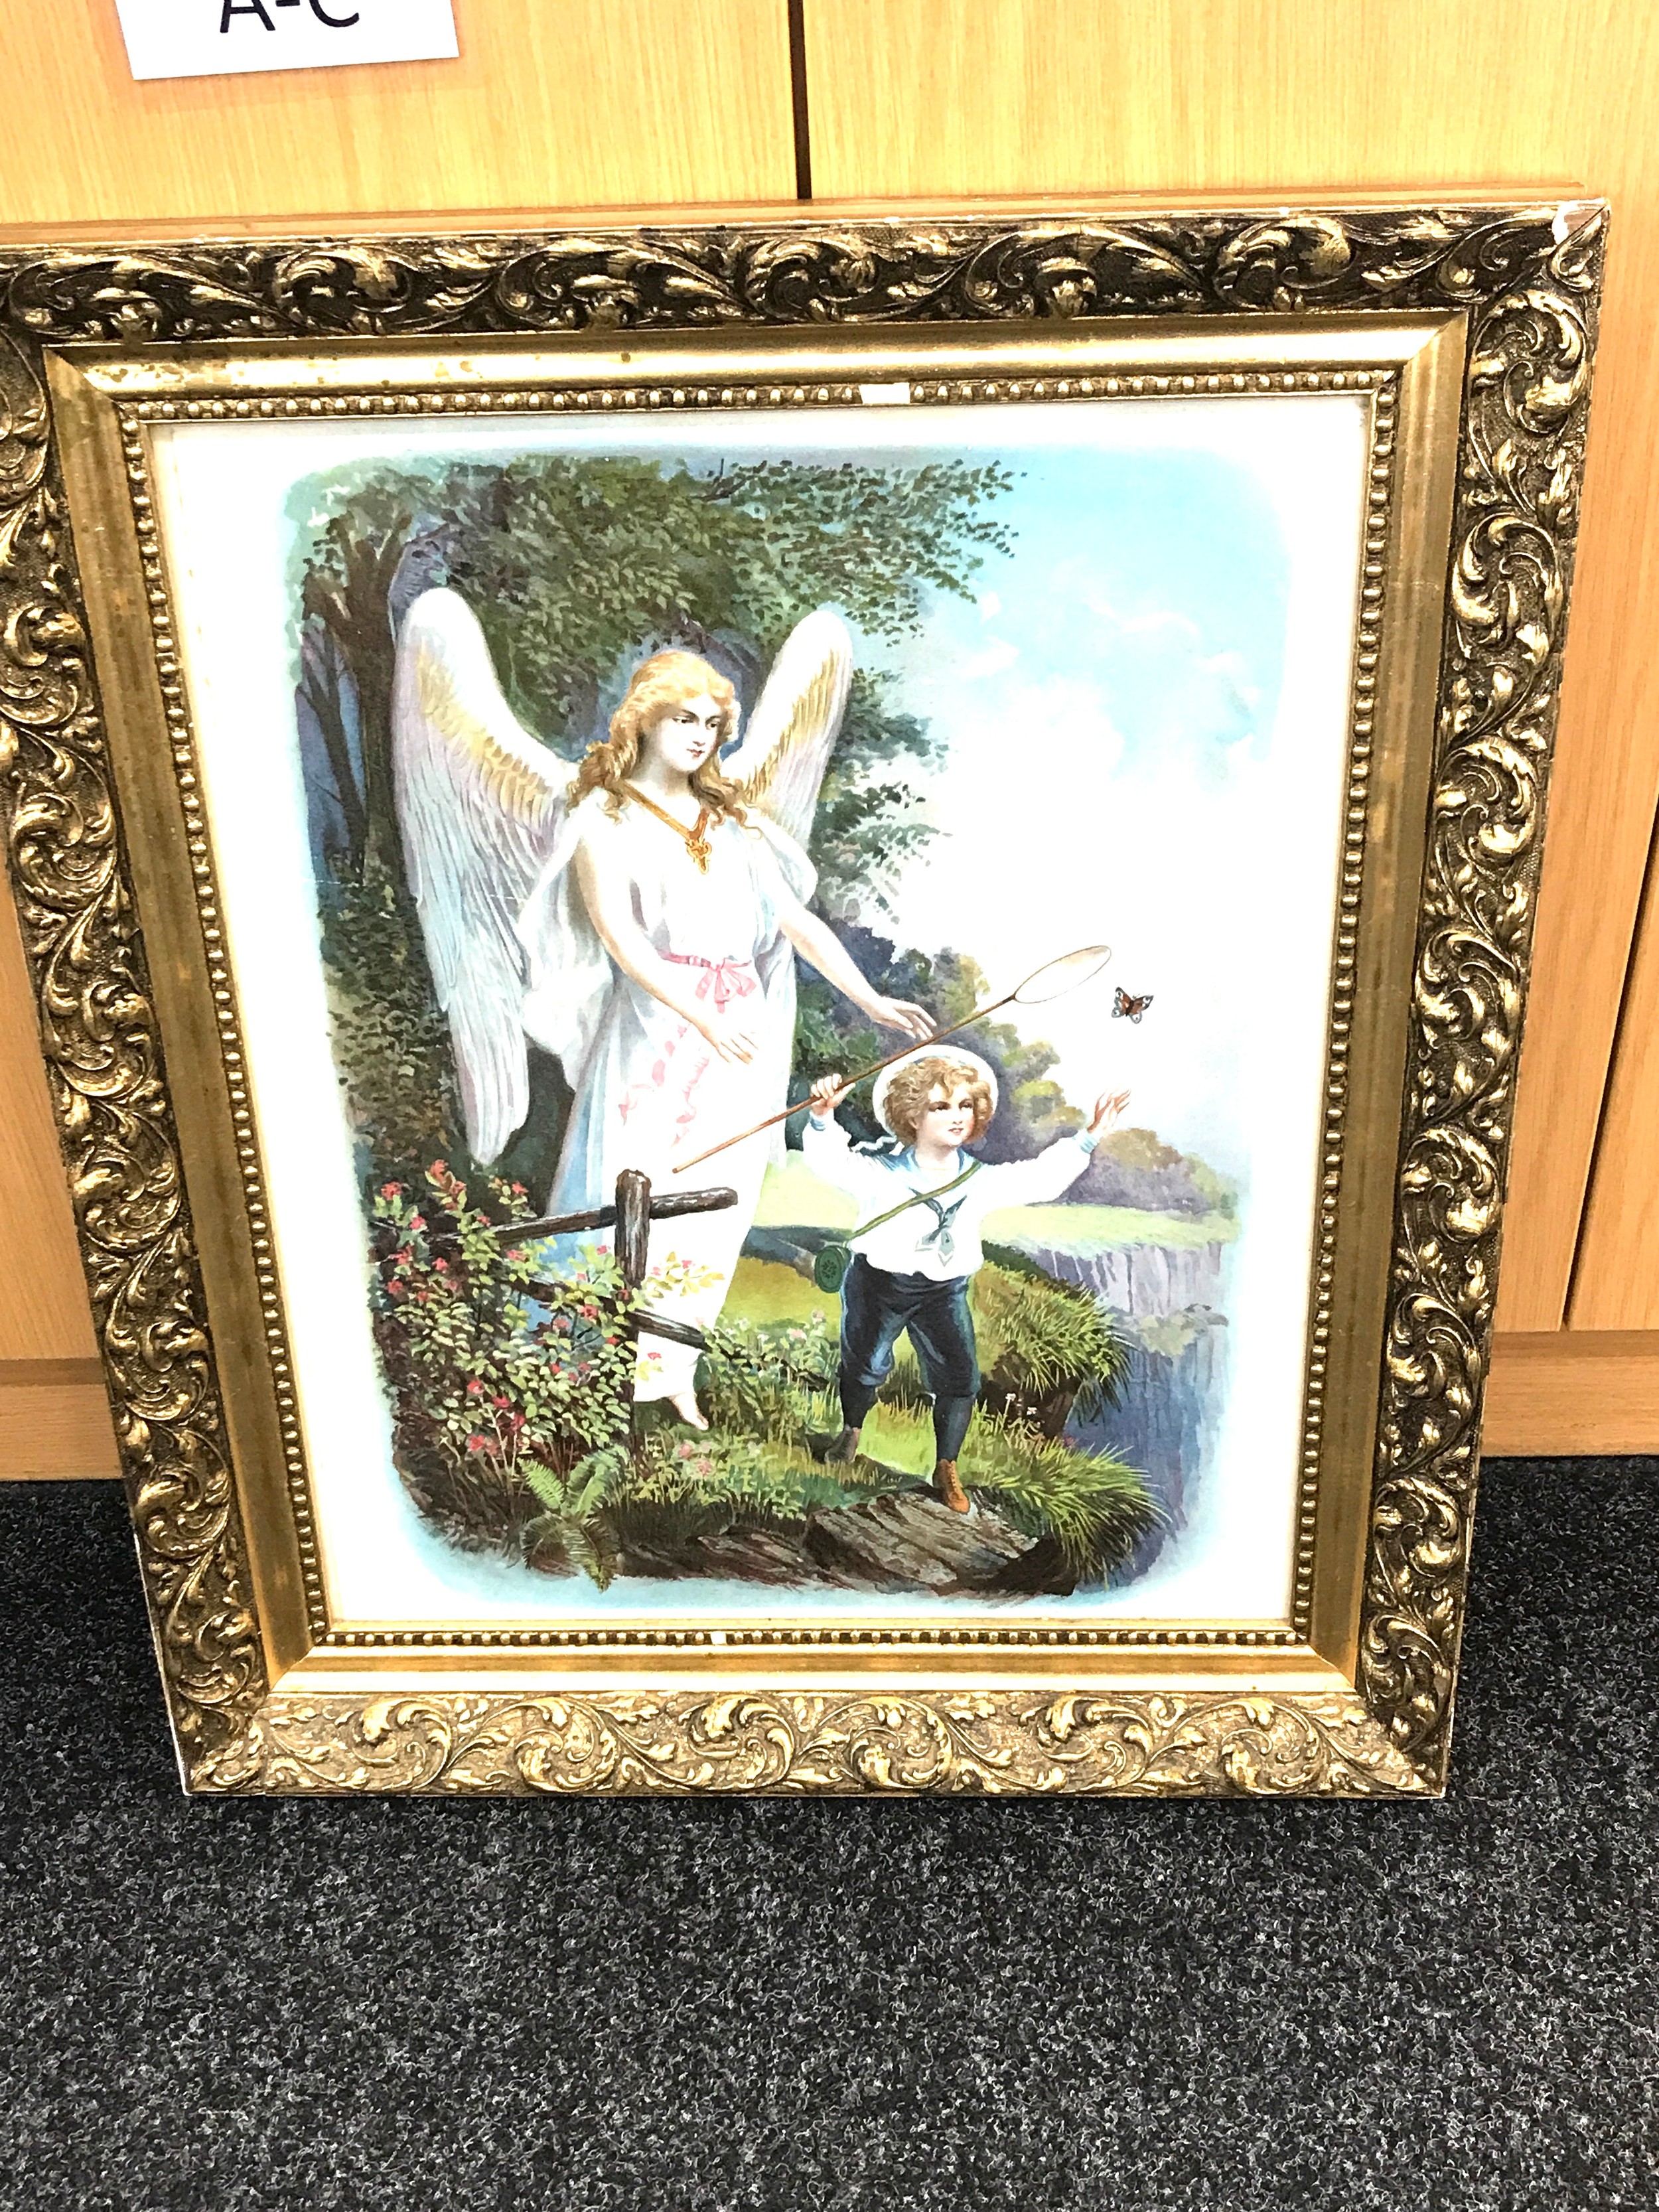 Framed Religious print, frame measures 25 inches tall by 20.5 inches wide - Image 2 of 2